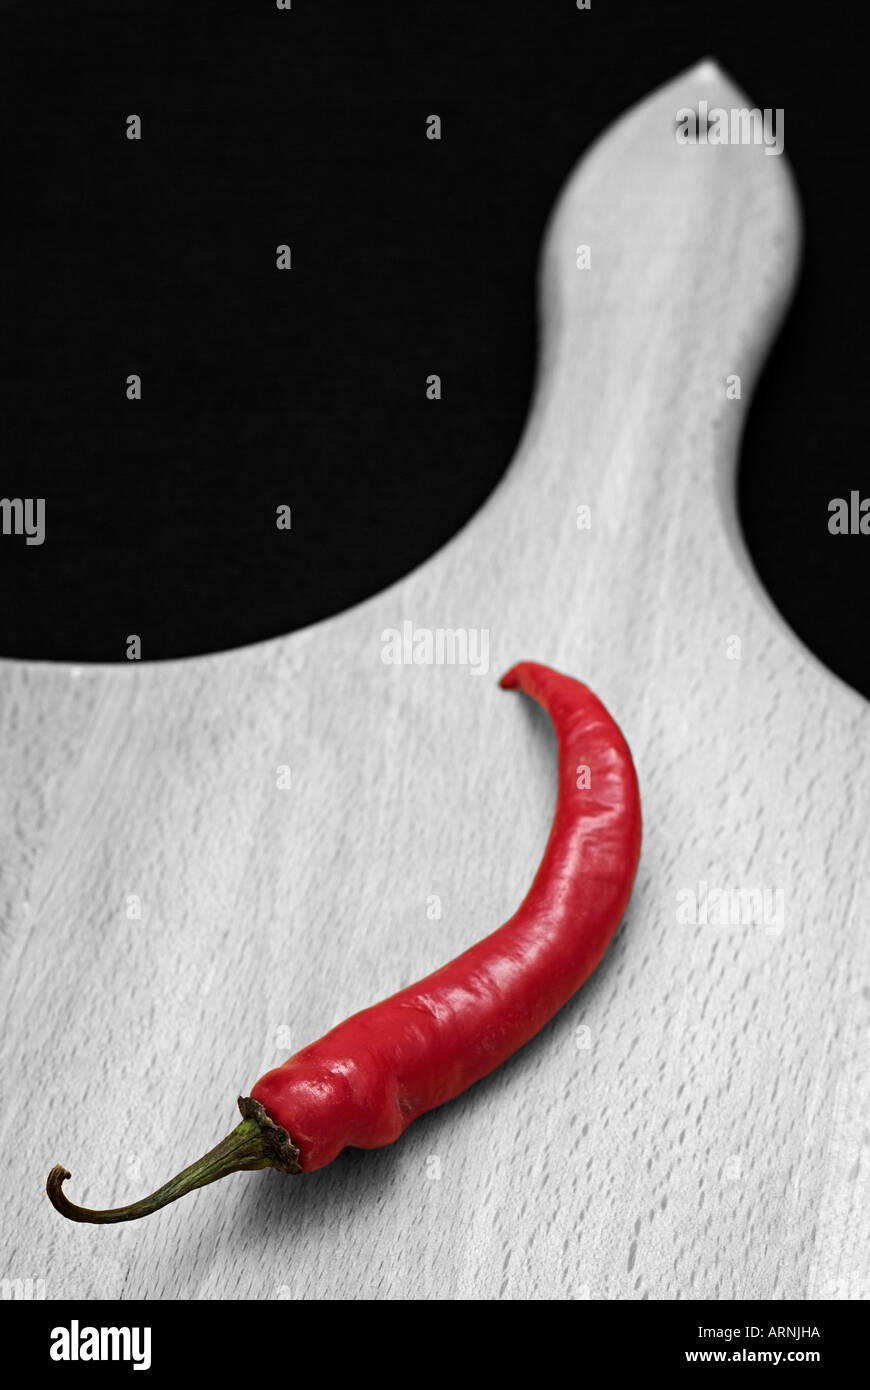 Colourised Red Chili Pepper on a Wooden Chopping Board Against a Black Background Capsicum Annum Stock Photo